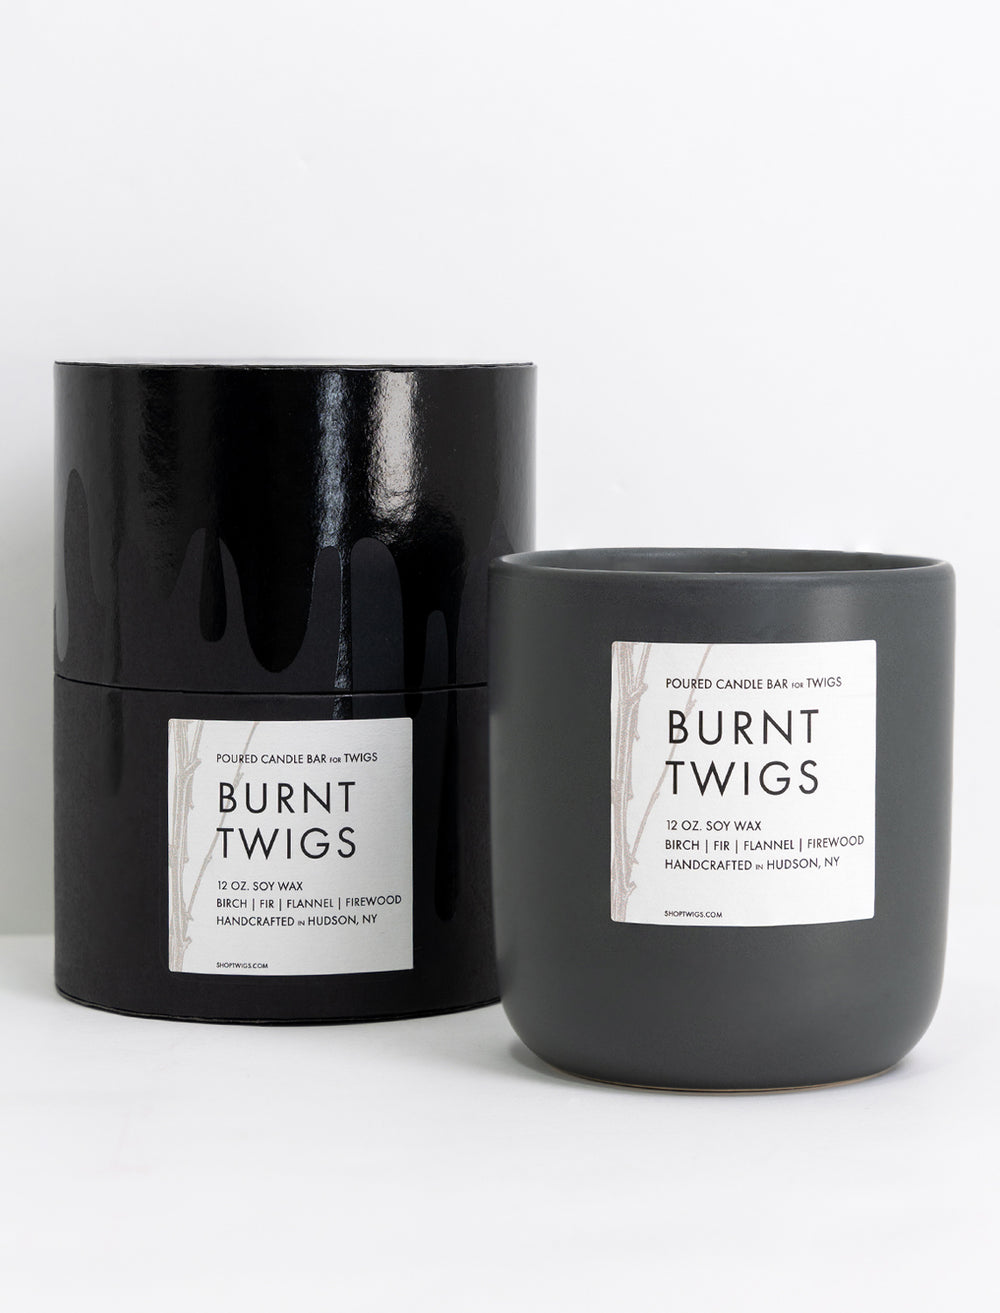 Product packaging of Poured Candle Bar's burnt twigs candle.